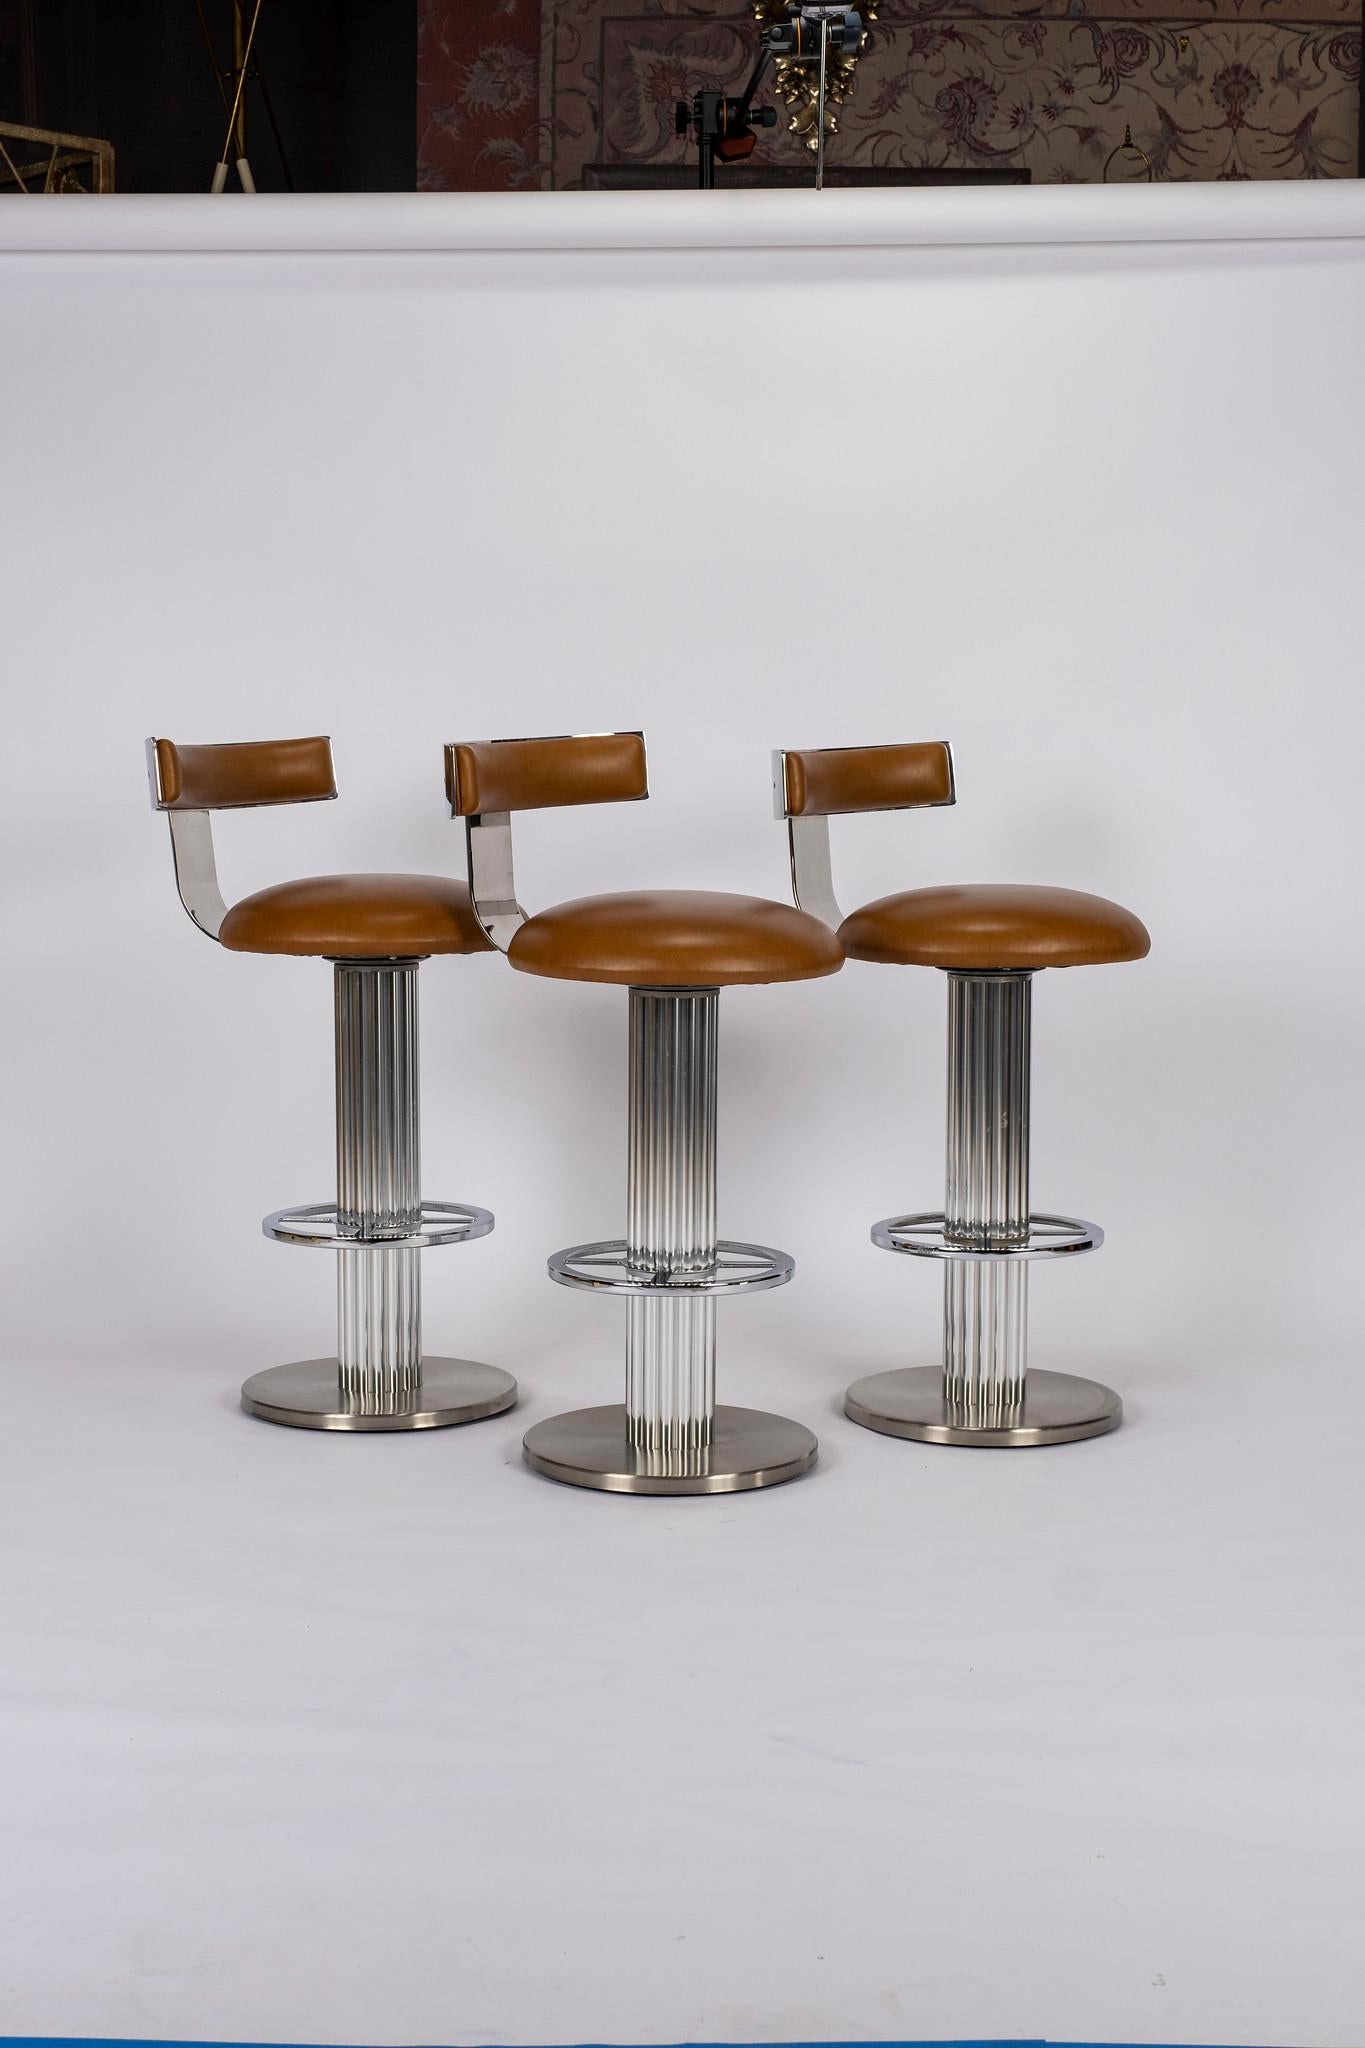 Art Deco Design For Leisure Chrome and Leather Barstools